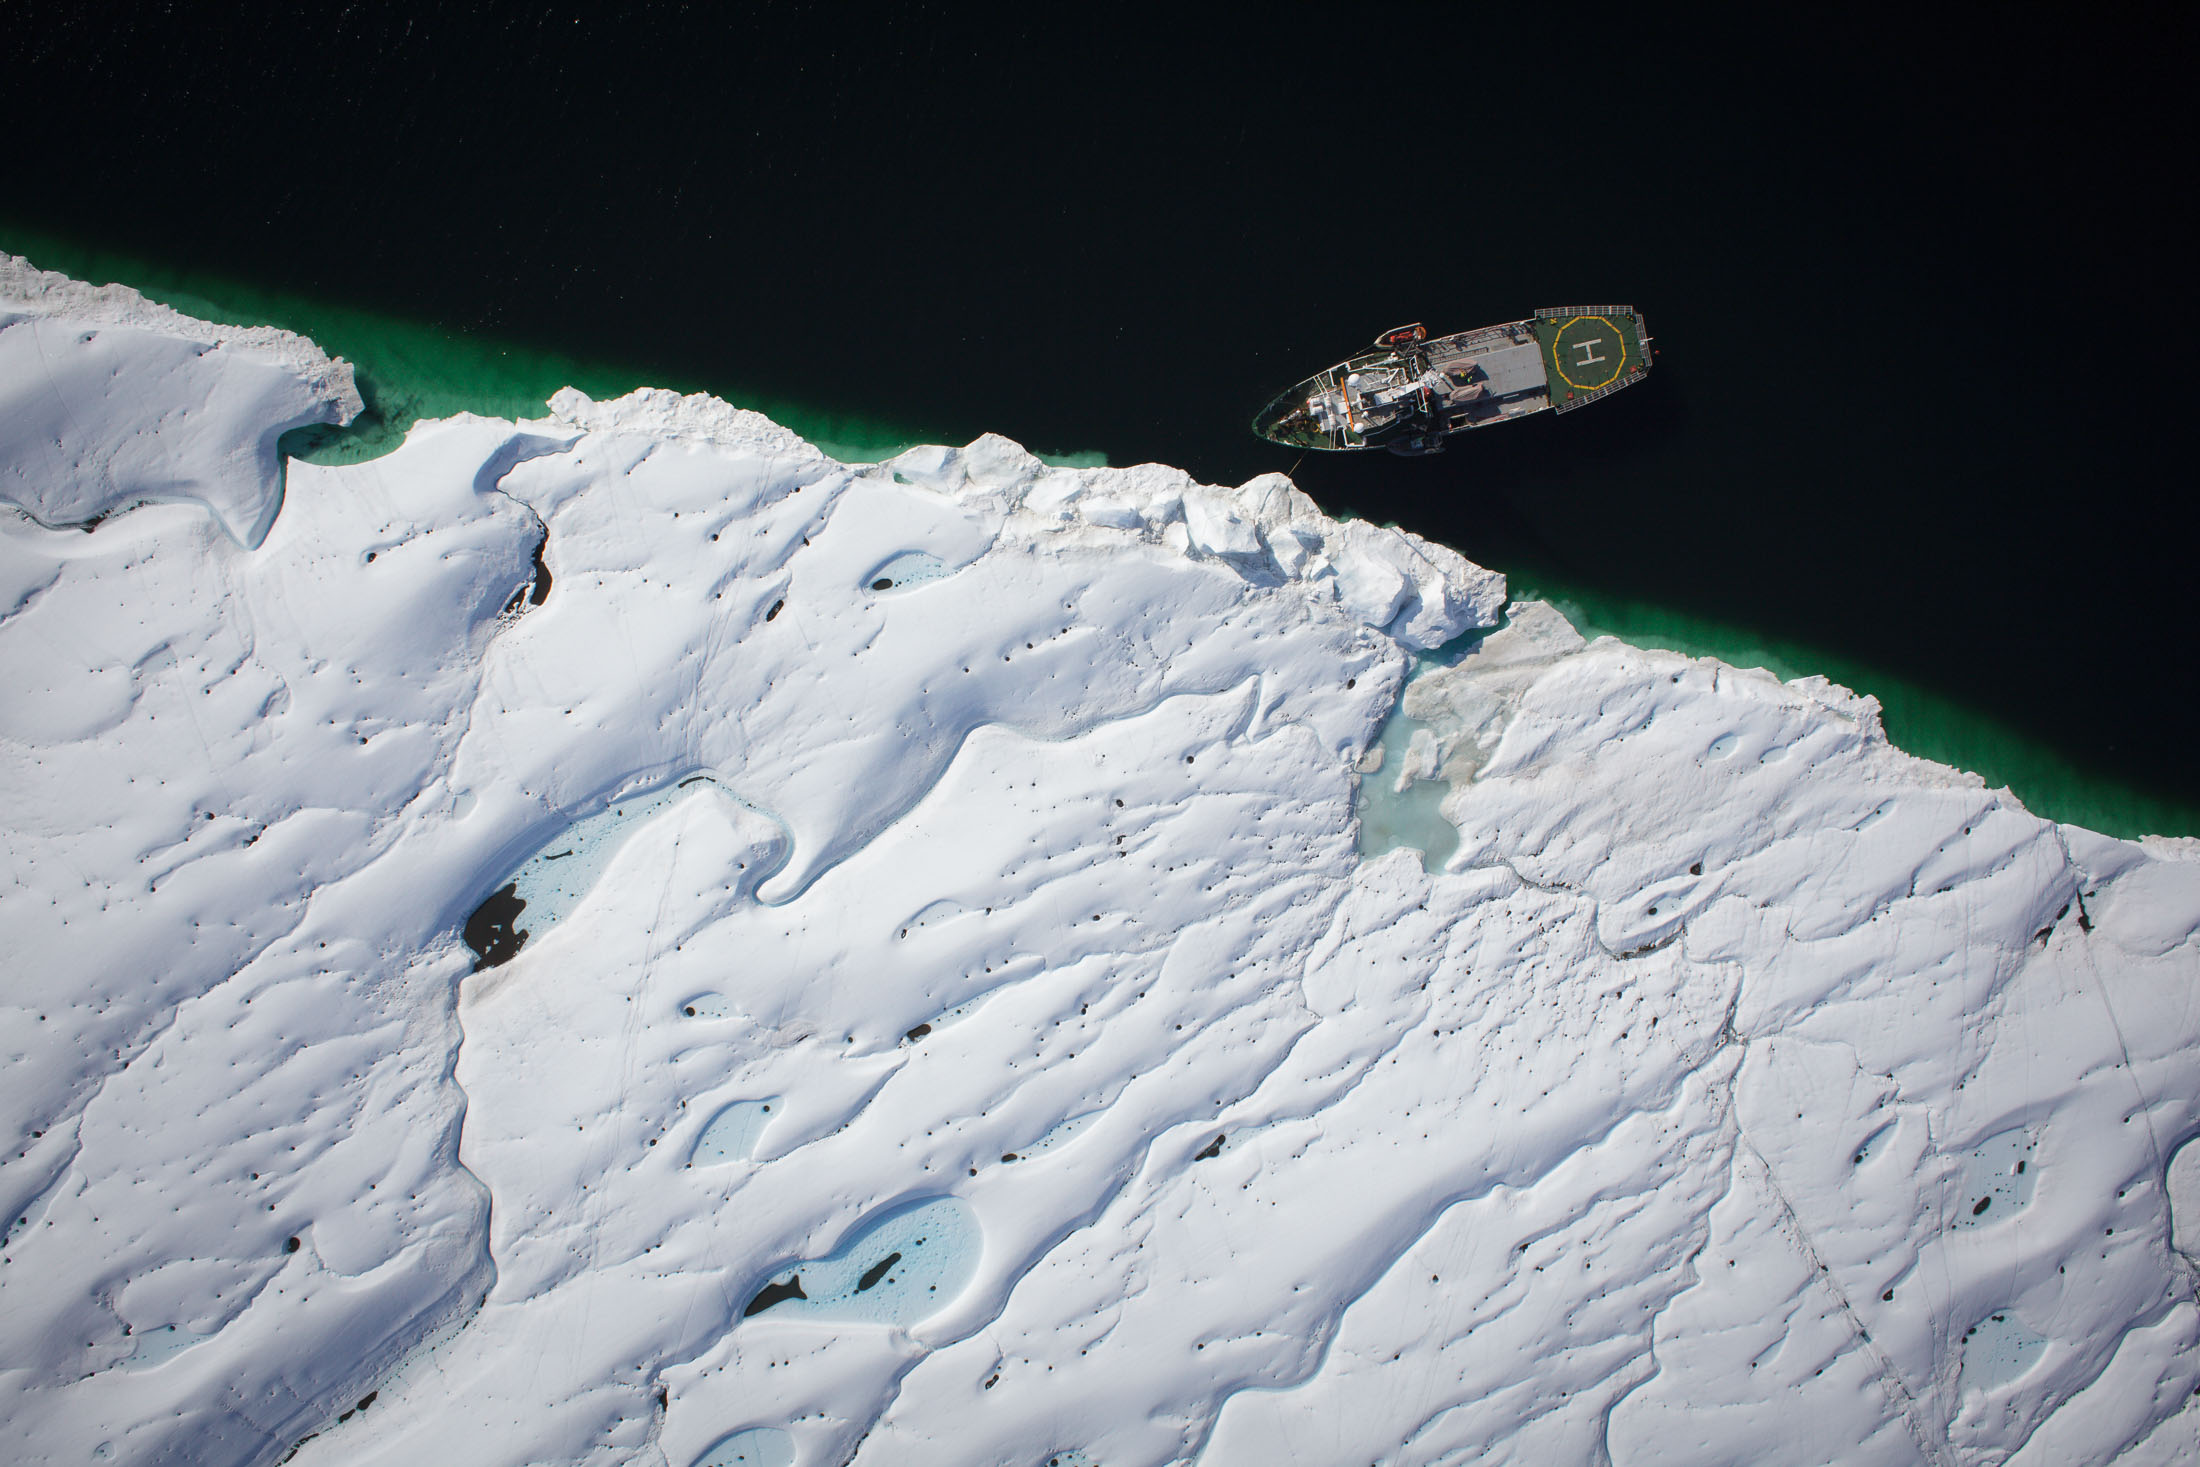 Ship at a glacier's edge photographed from the air